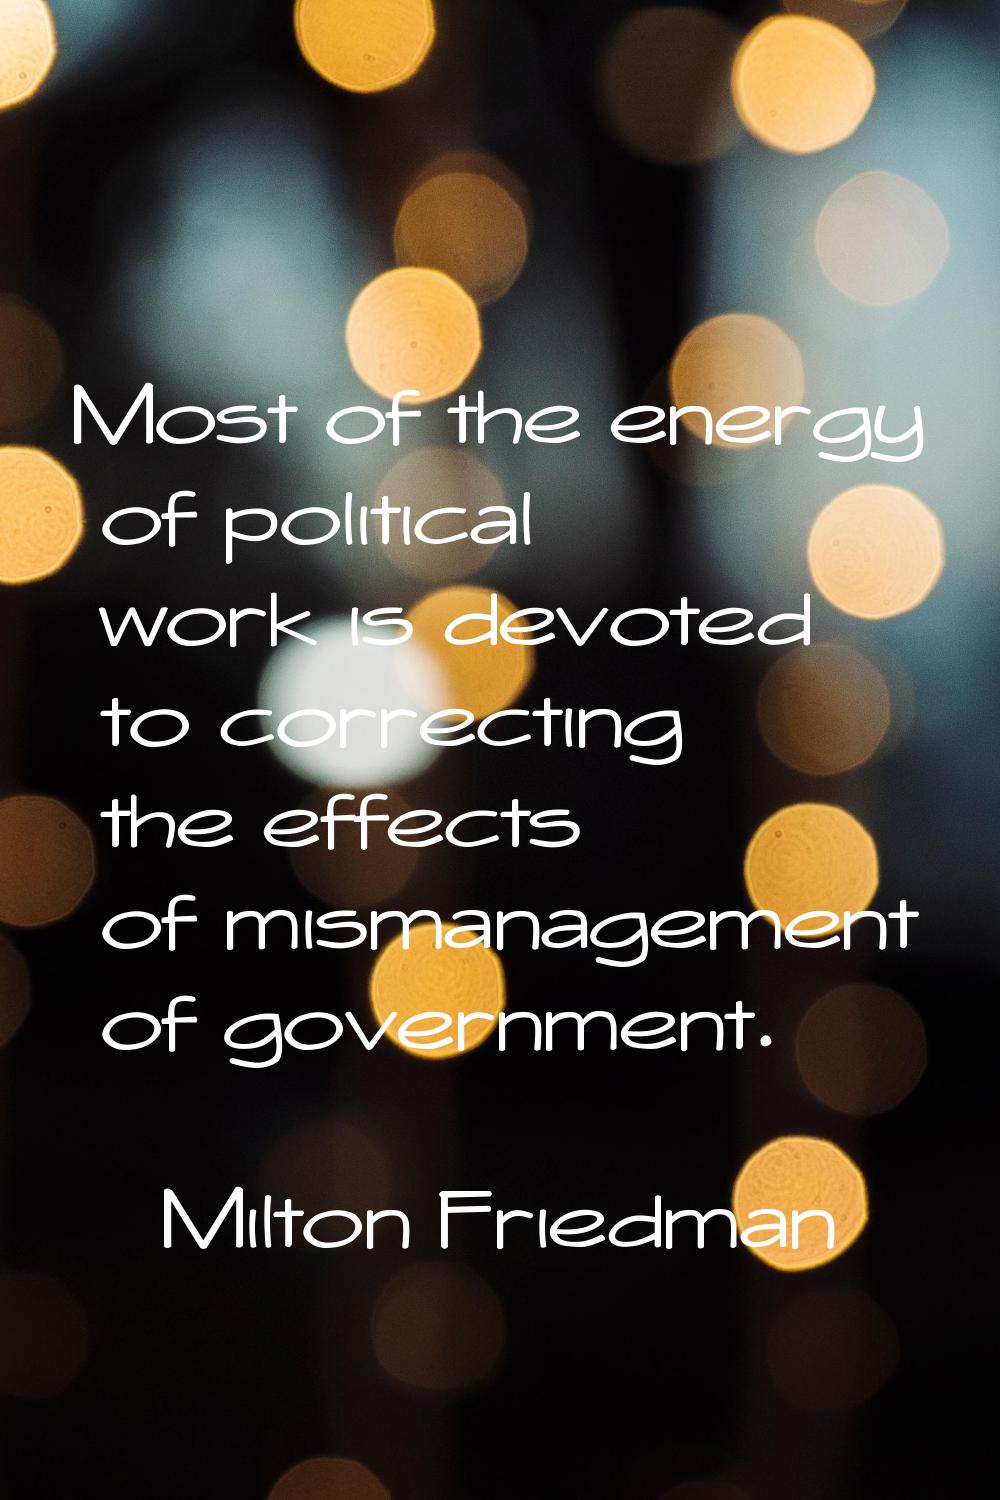 Most of the energy of political work is devoted to correcting the effects of mismanagement of gover